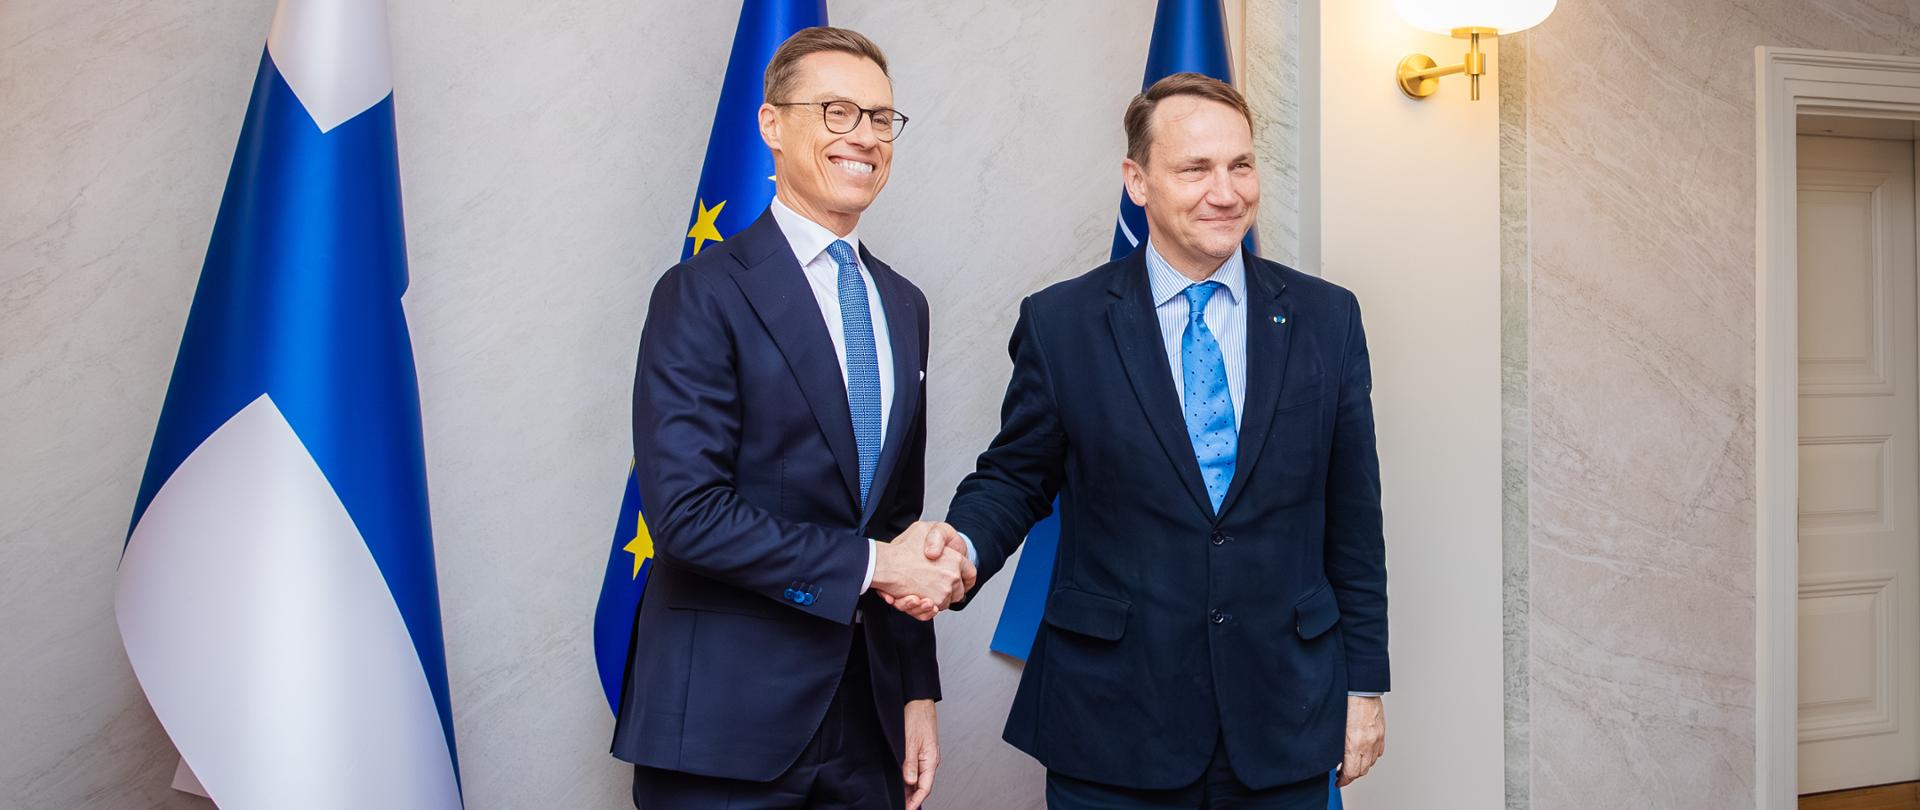 During his visit to Helsinki, the head of the Polish Foreign Ministry met with Finnish President Alexander Stubb 